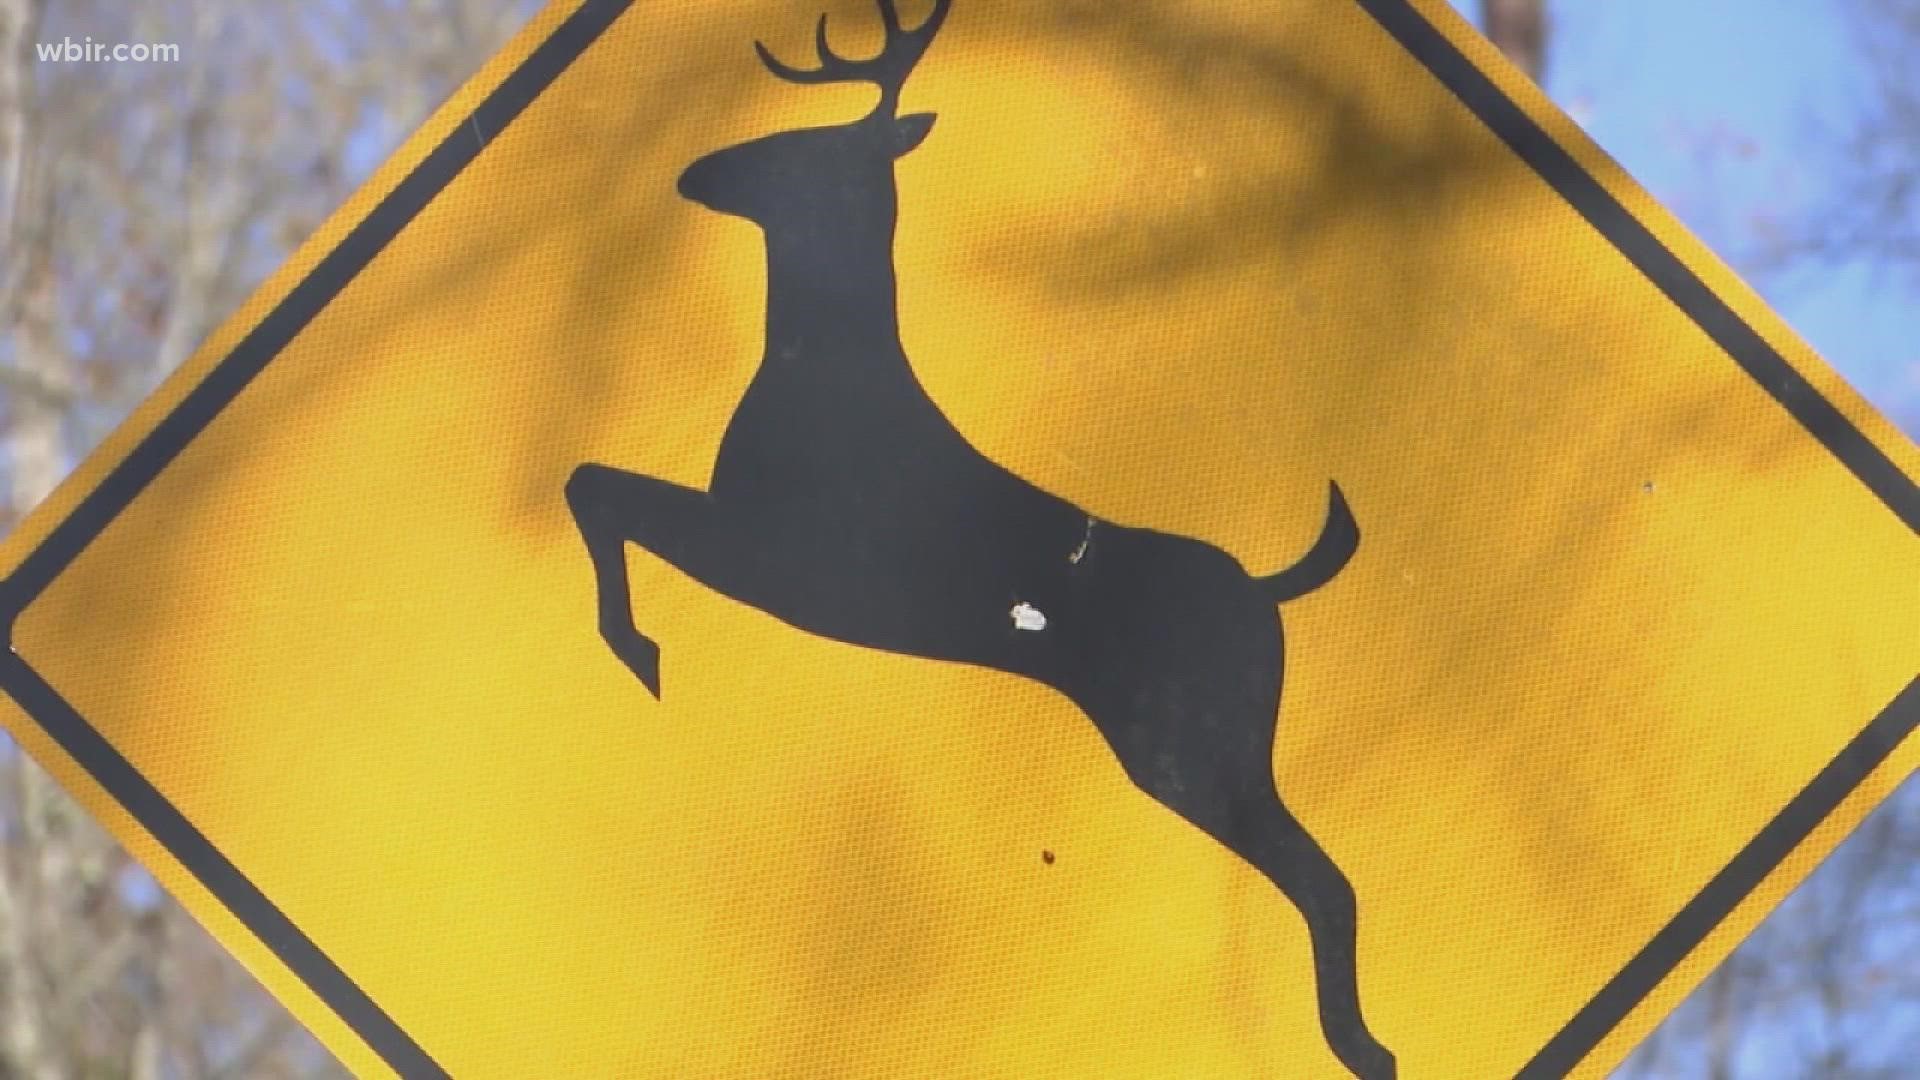 A Powell mechanic said that he has seen hundreds of wrecked cars because of deer. He said it can cost thousands to fix them.